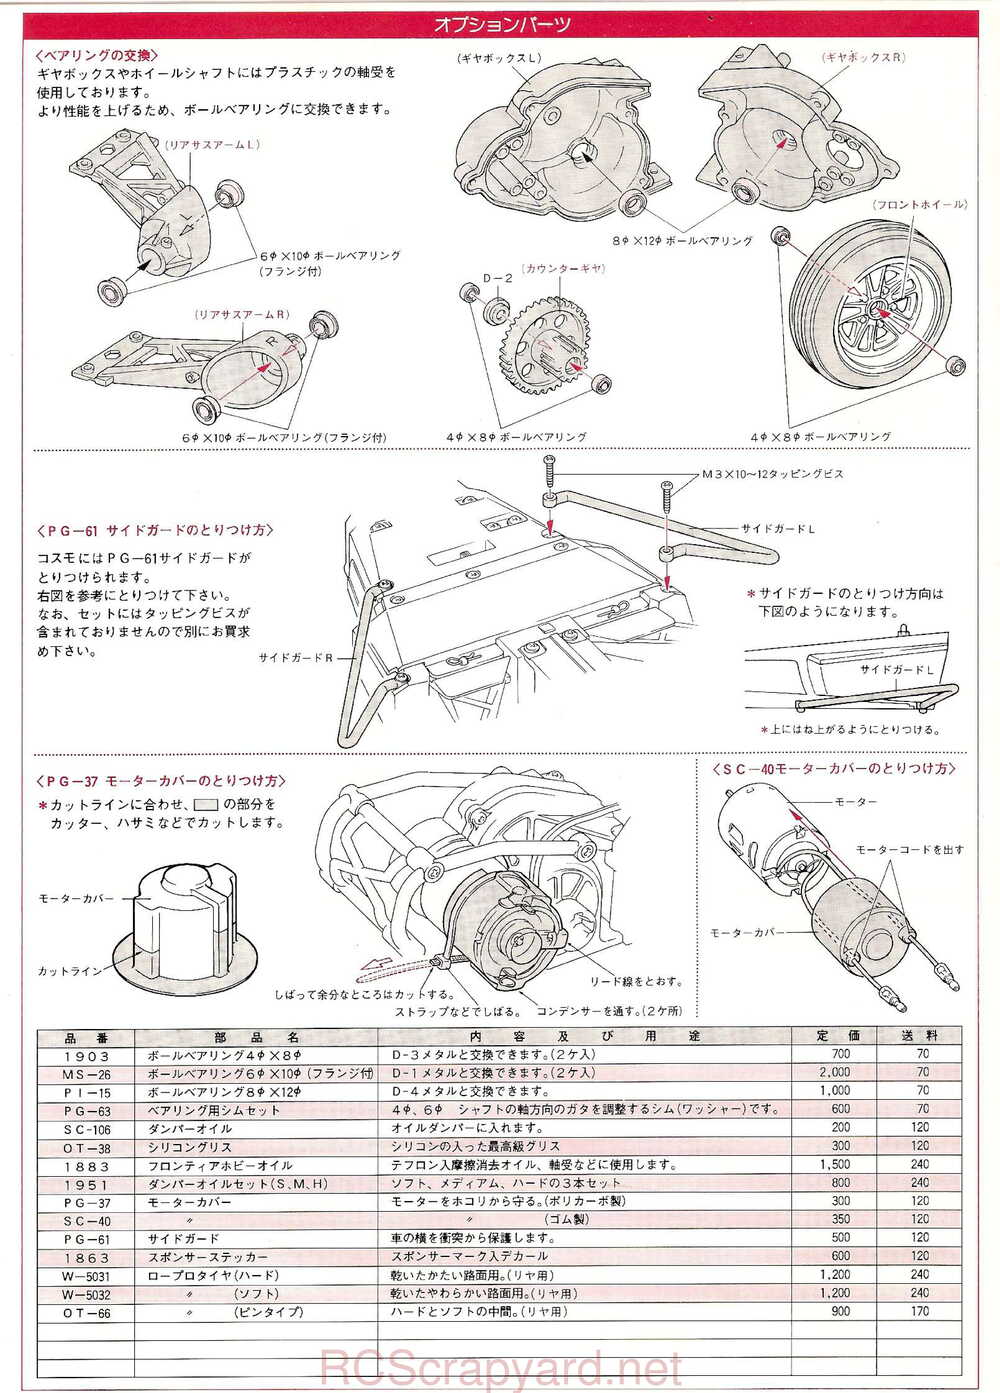 Kyosho - 3084 - Cosmo - Manual - Page 17